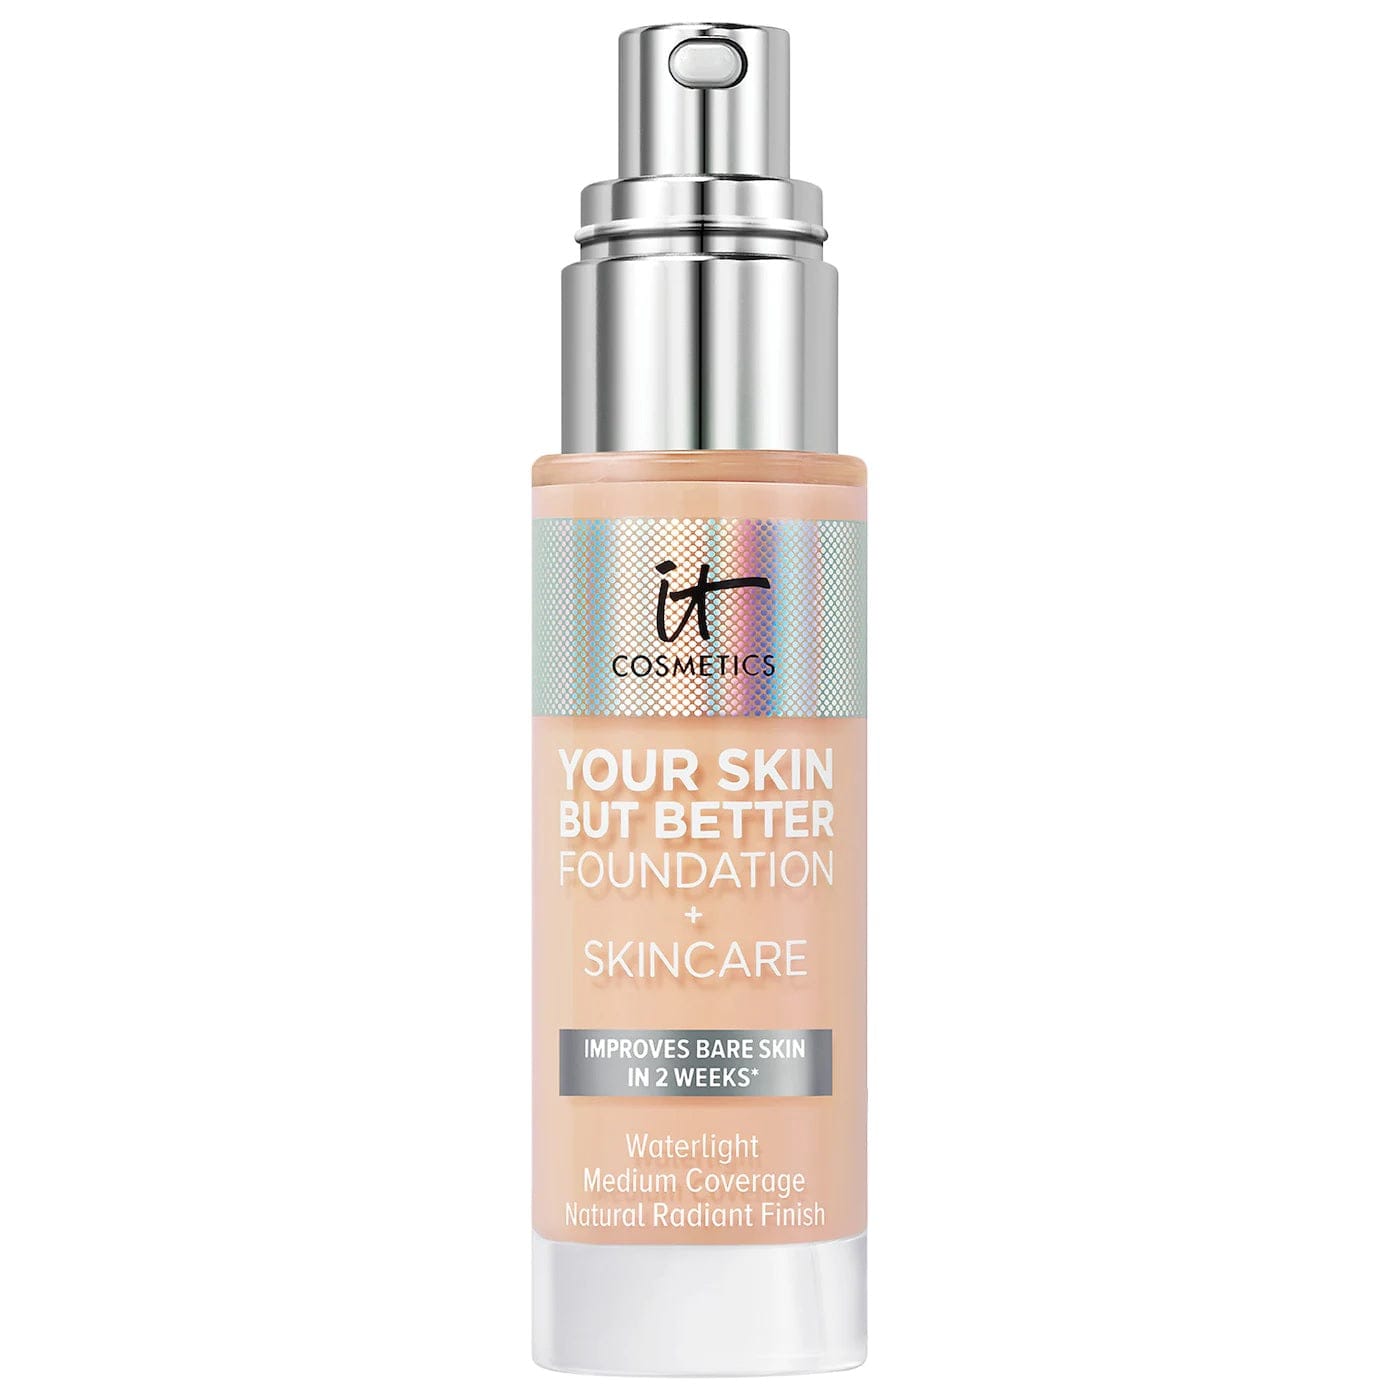 IT COSMETICS Beauty IT Cosmetics Your Skin But Better Foundation and Skincare 30ml - 11 Fair Neutral